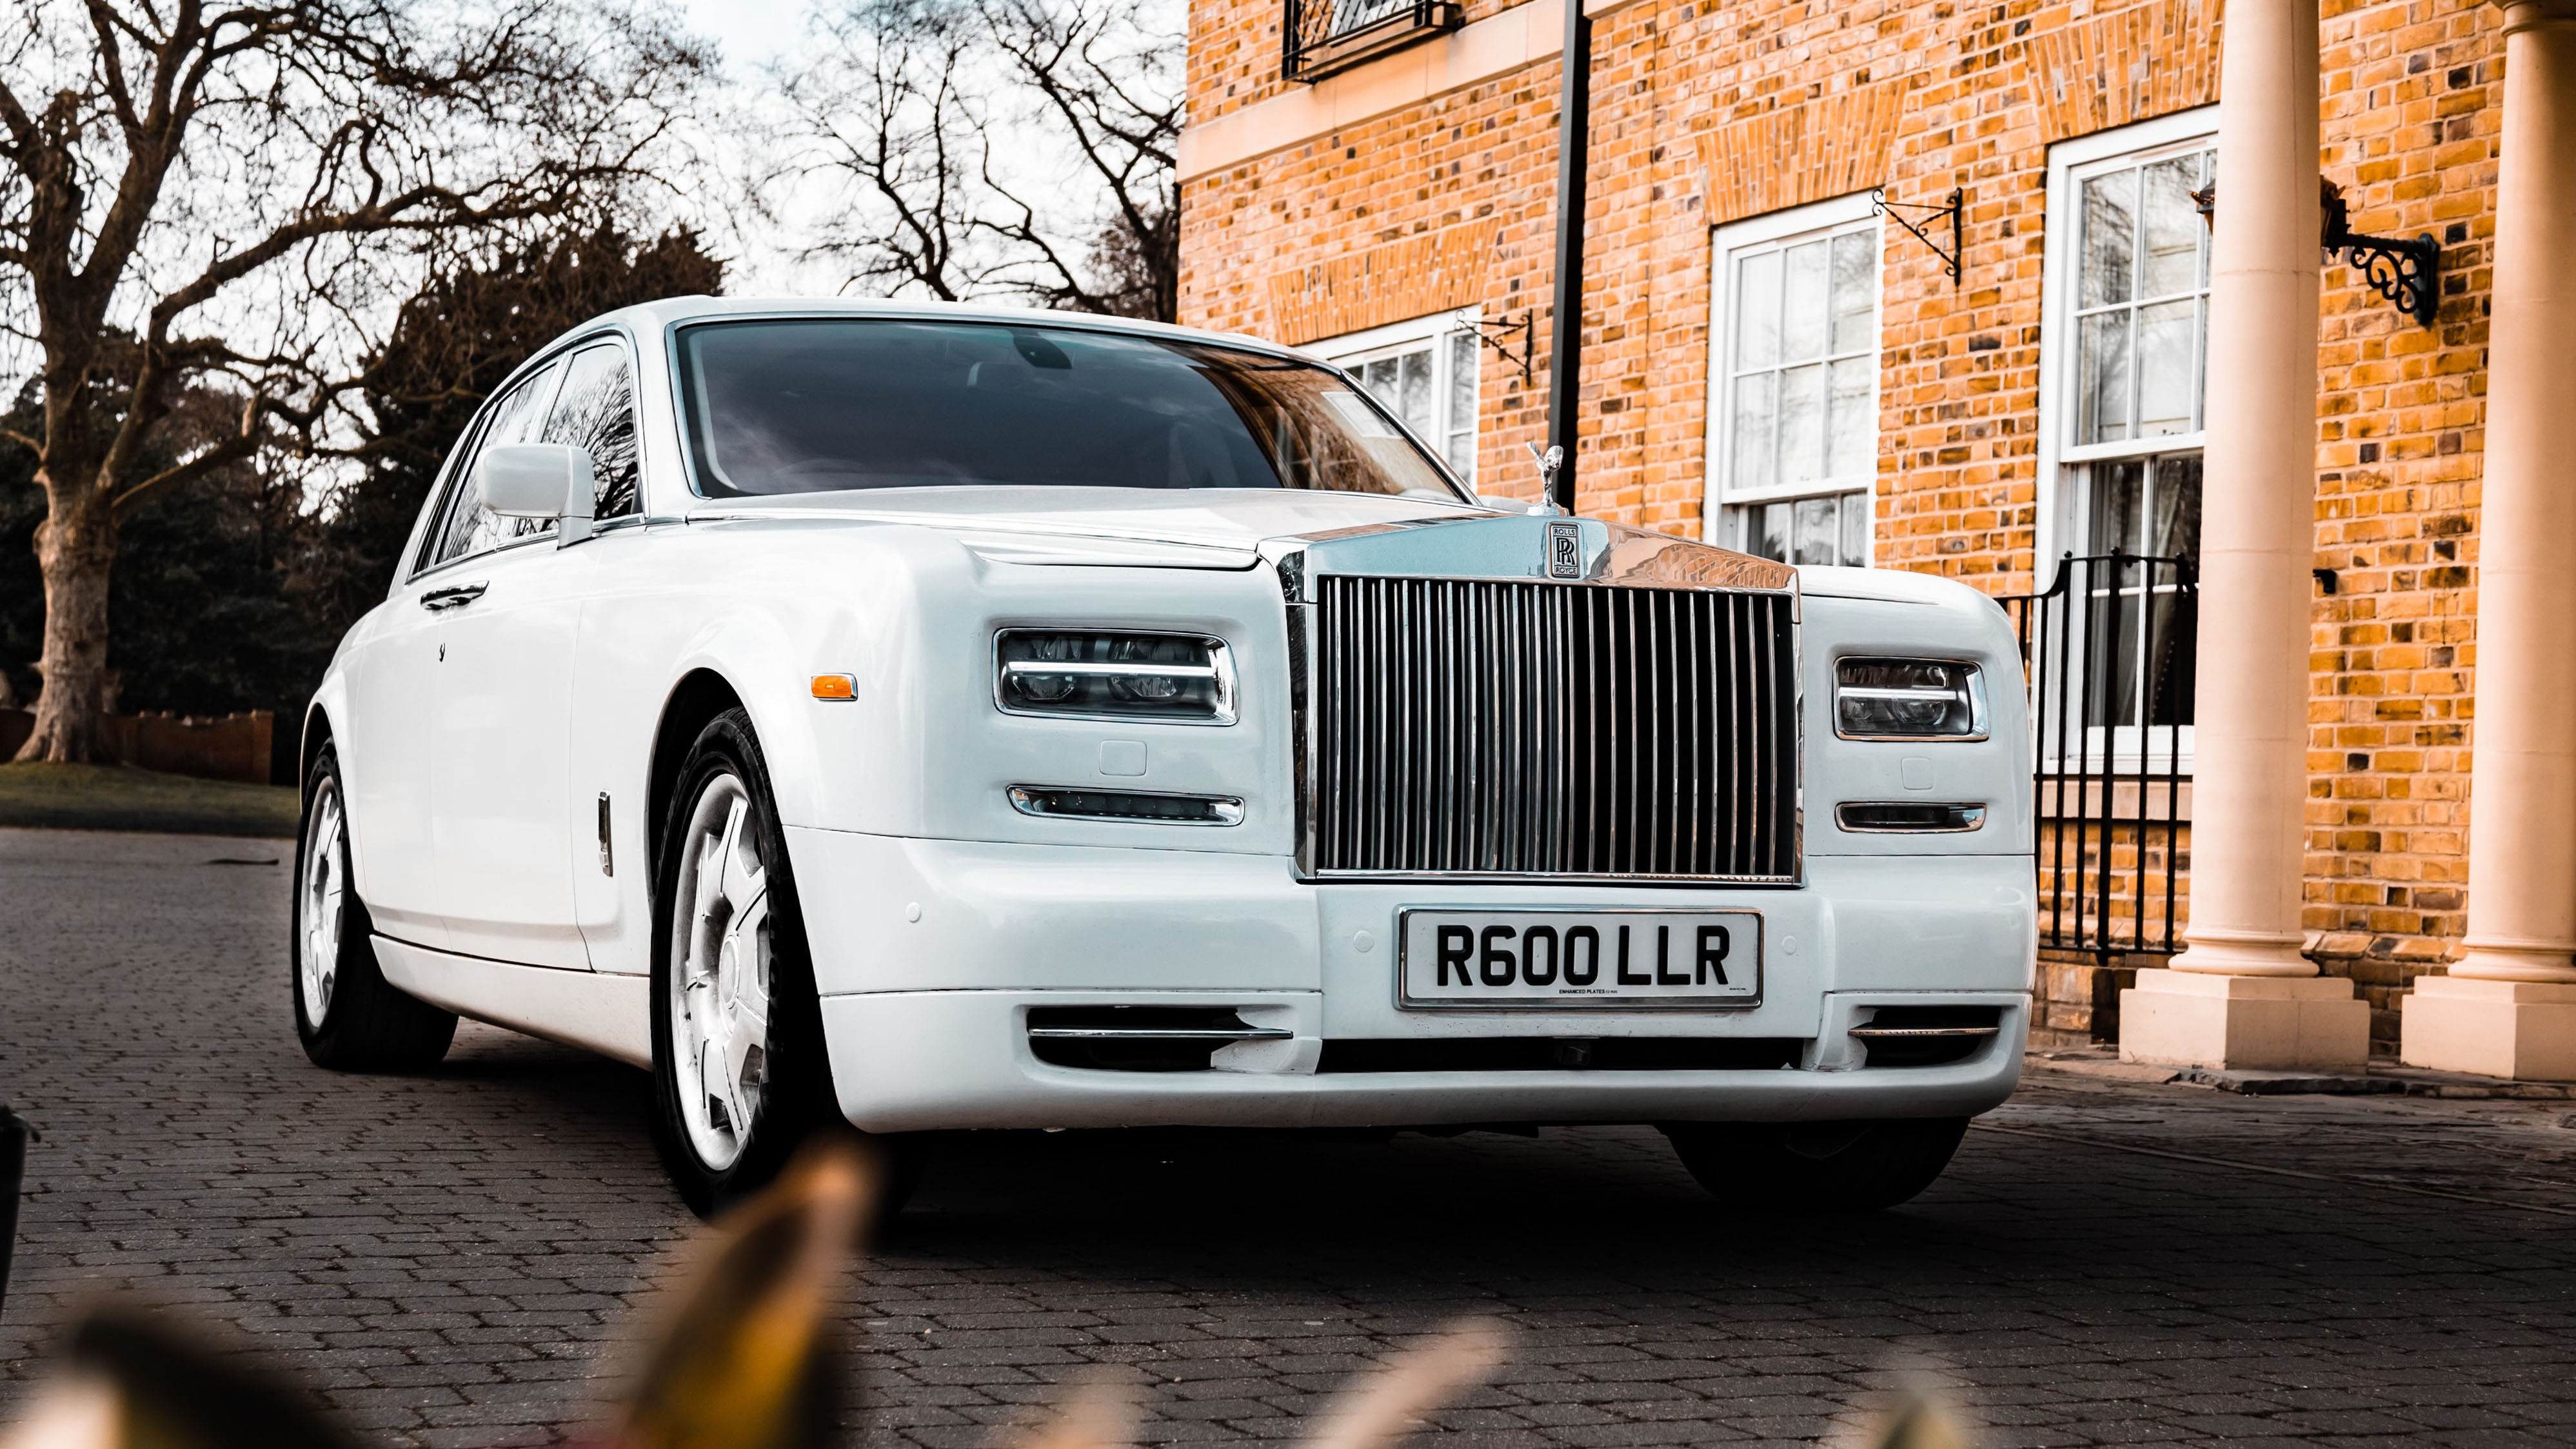 Modern white Rolls-Royce Phantom with its large chrome alloy wheels and iconic chrome front grill in attendance at a popular wedding venue in Loughton in Essex.